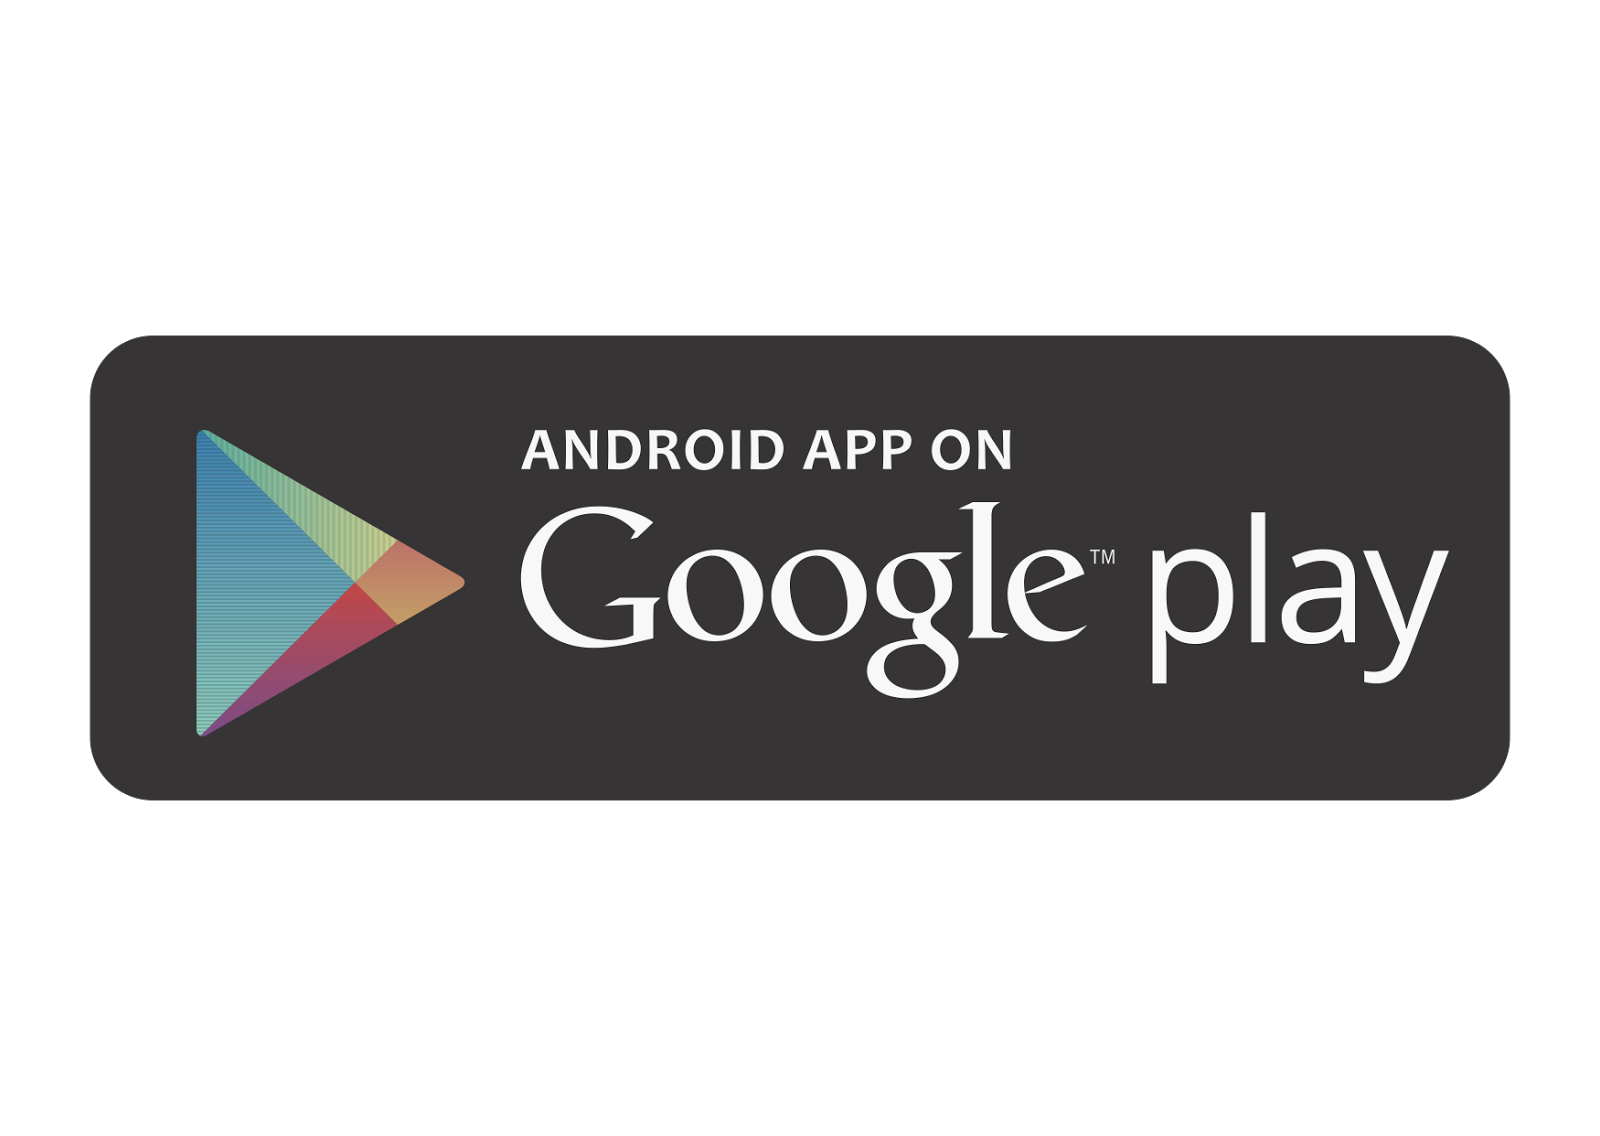 Android app on google play Logo Vector, Format Cdr, Ai. 